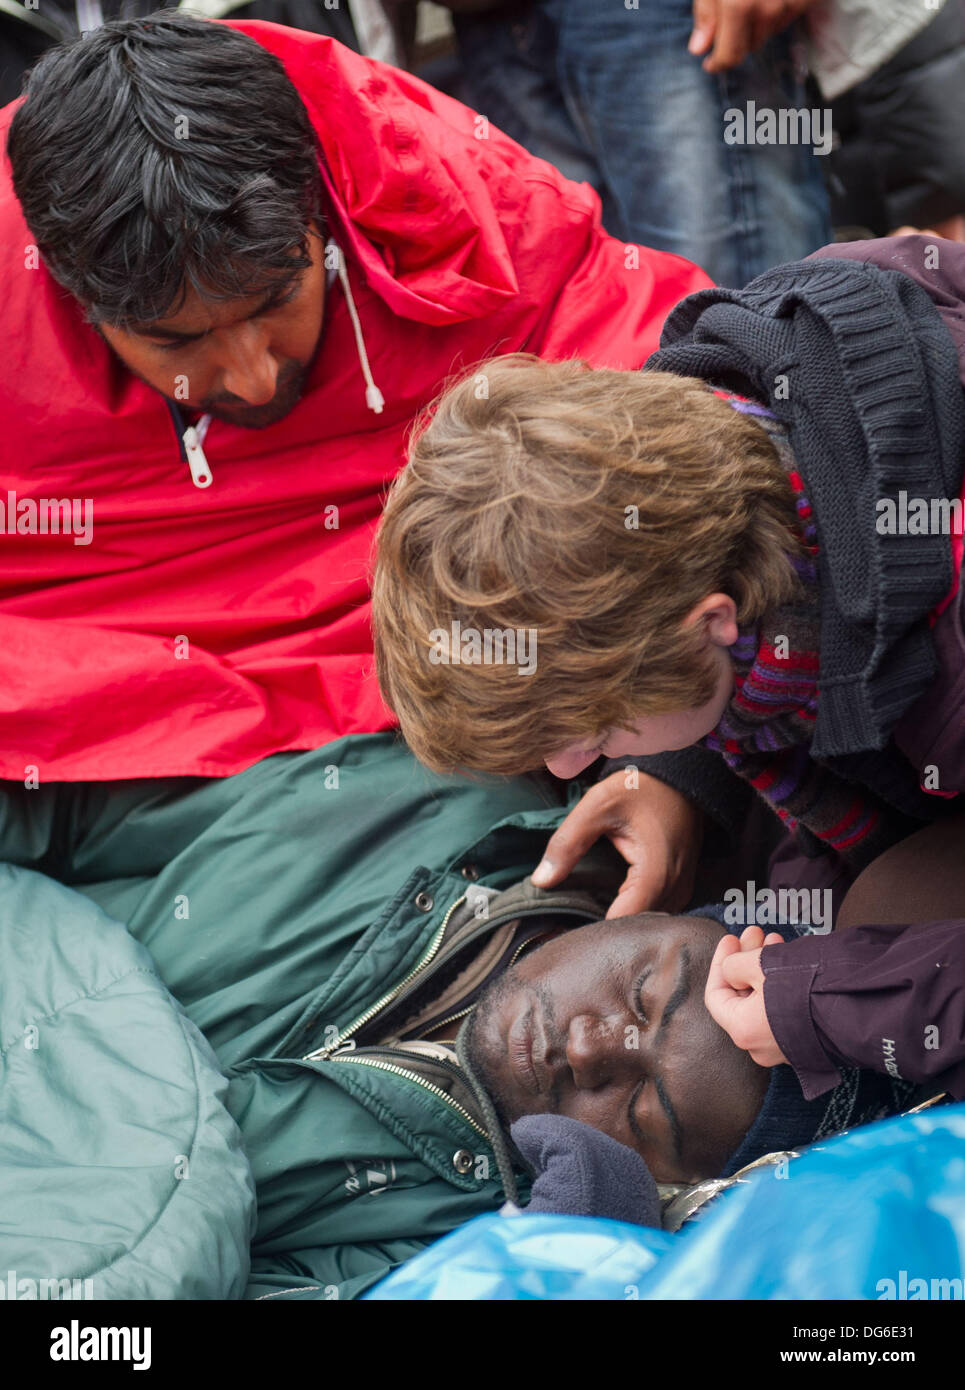 Berlin, Germany. 15th Oct, 2013. A refugee lies on the ground as his comrades take care of him on Pariser Platz in Berlin, Germany, 15 October 2013. Three refugees had to be taken to hospital because of their poor state of health. The refugees have been on hunger strike since 09 October 2013. Photo: OLE SPATA/dpa/Alamy Live News Stock Photo